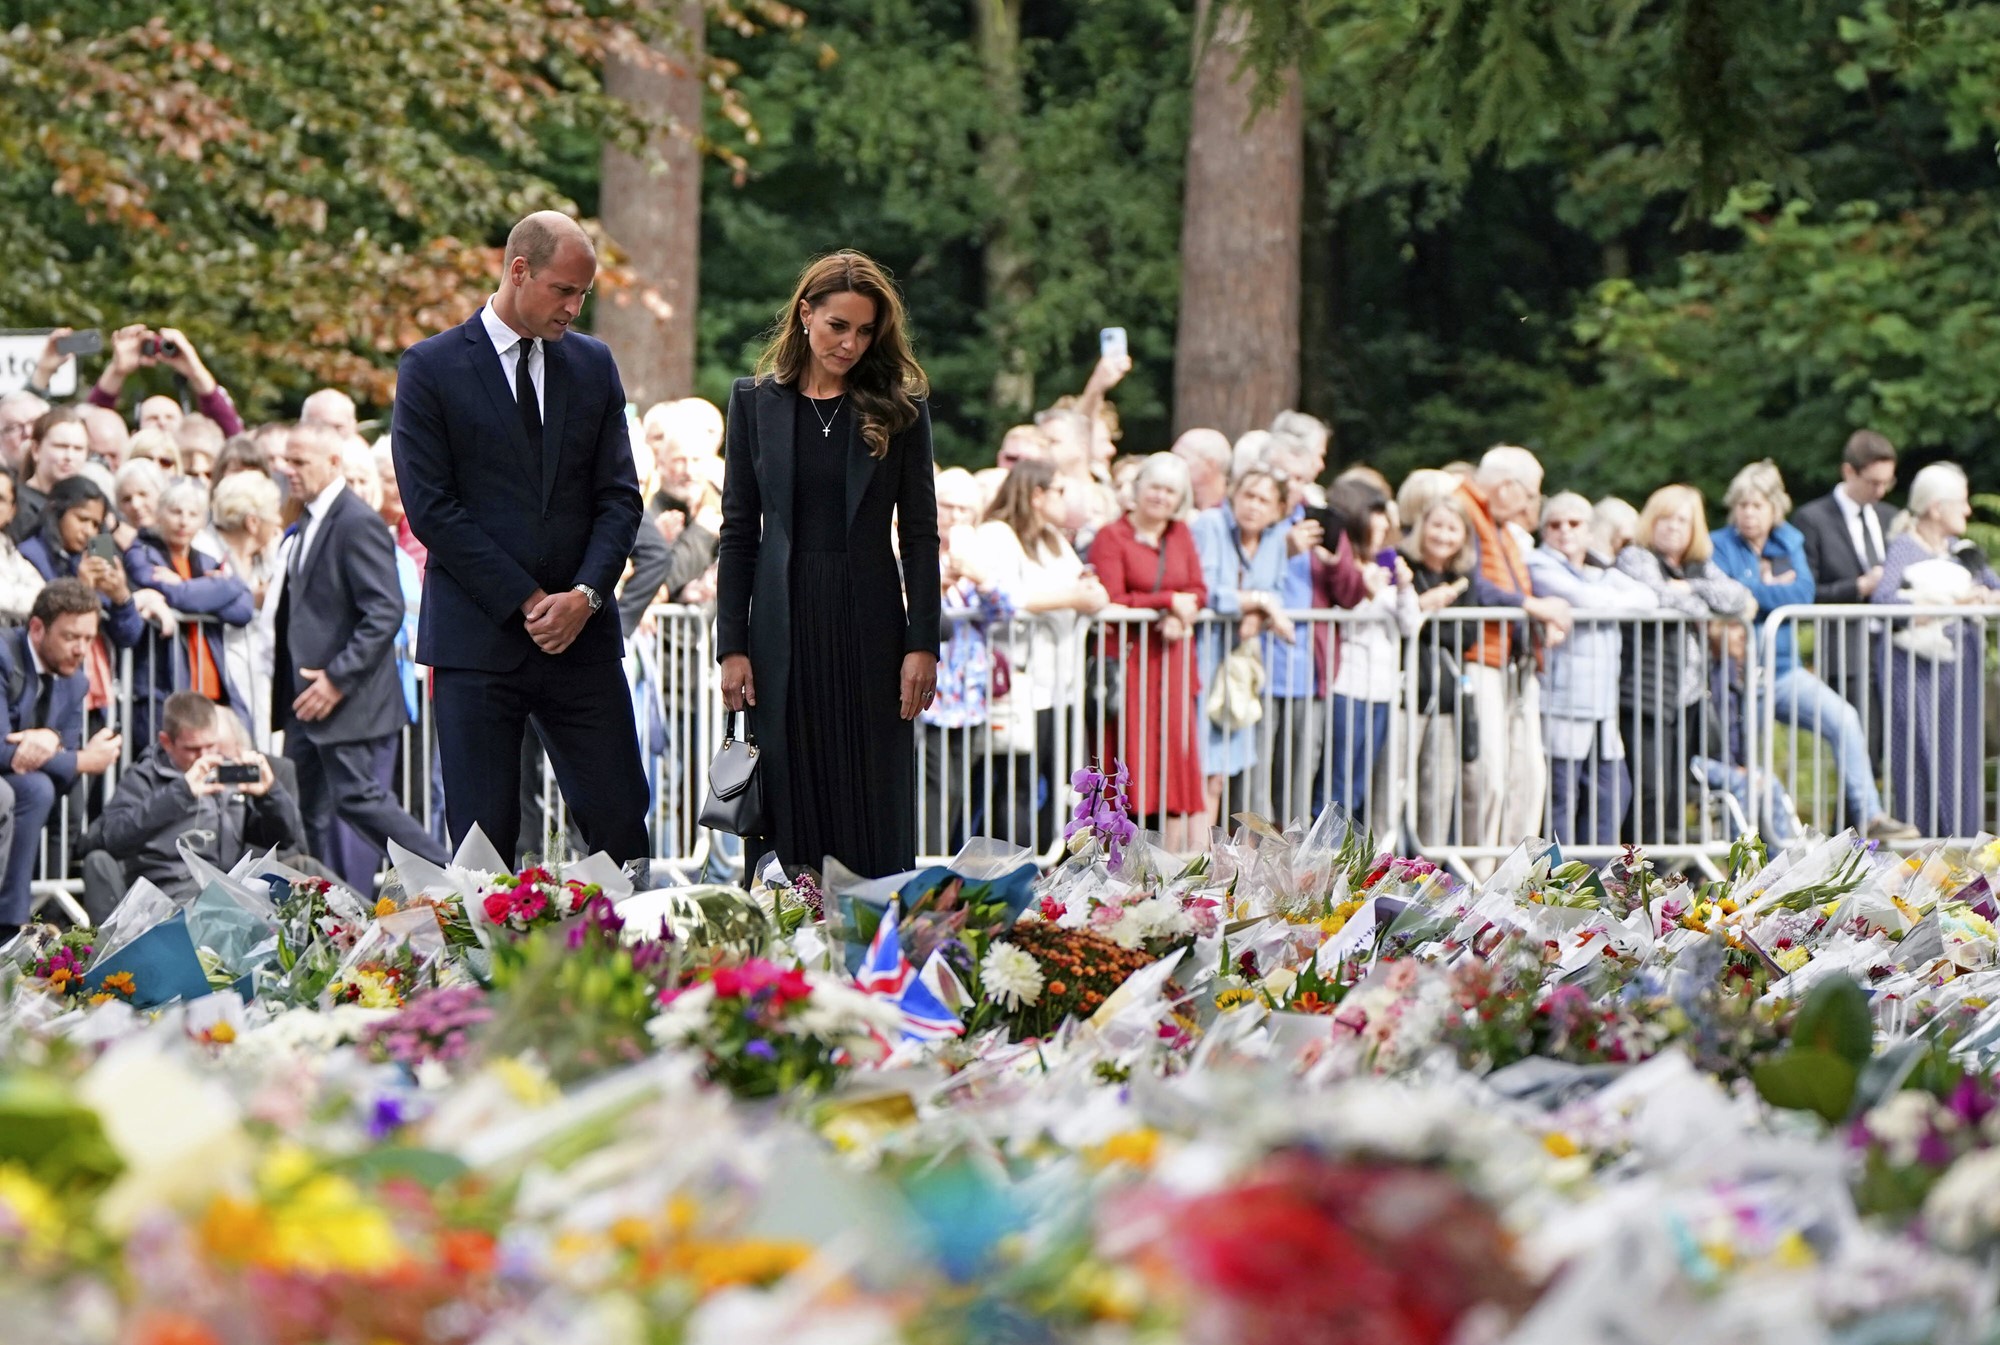 Prince William and Princess Kate look at bouquets of flowers in front of a crowd.